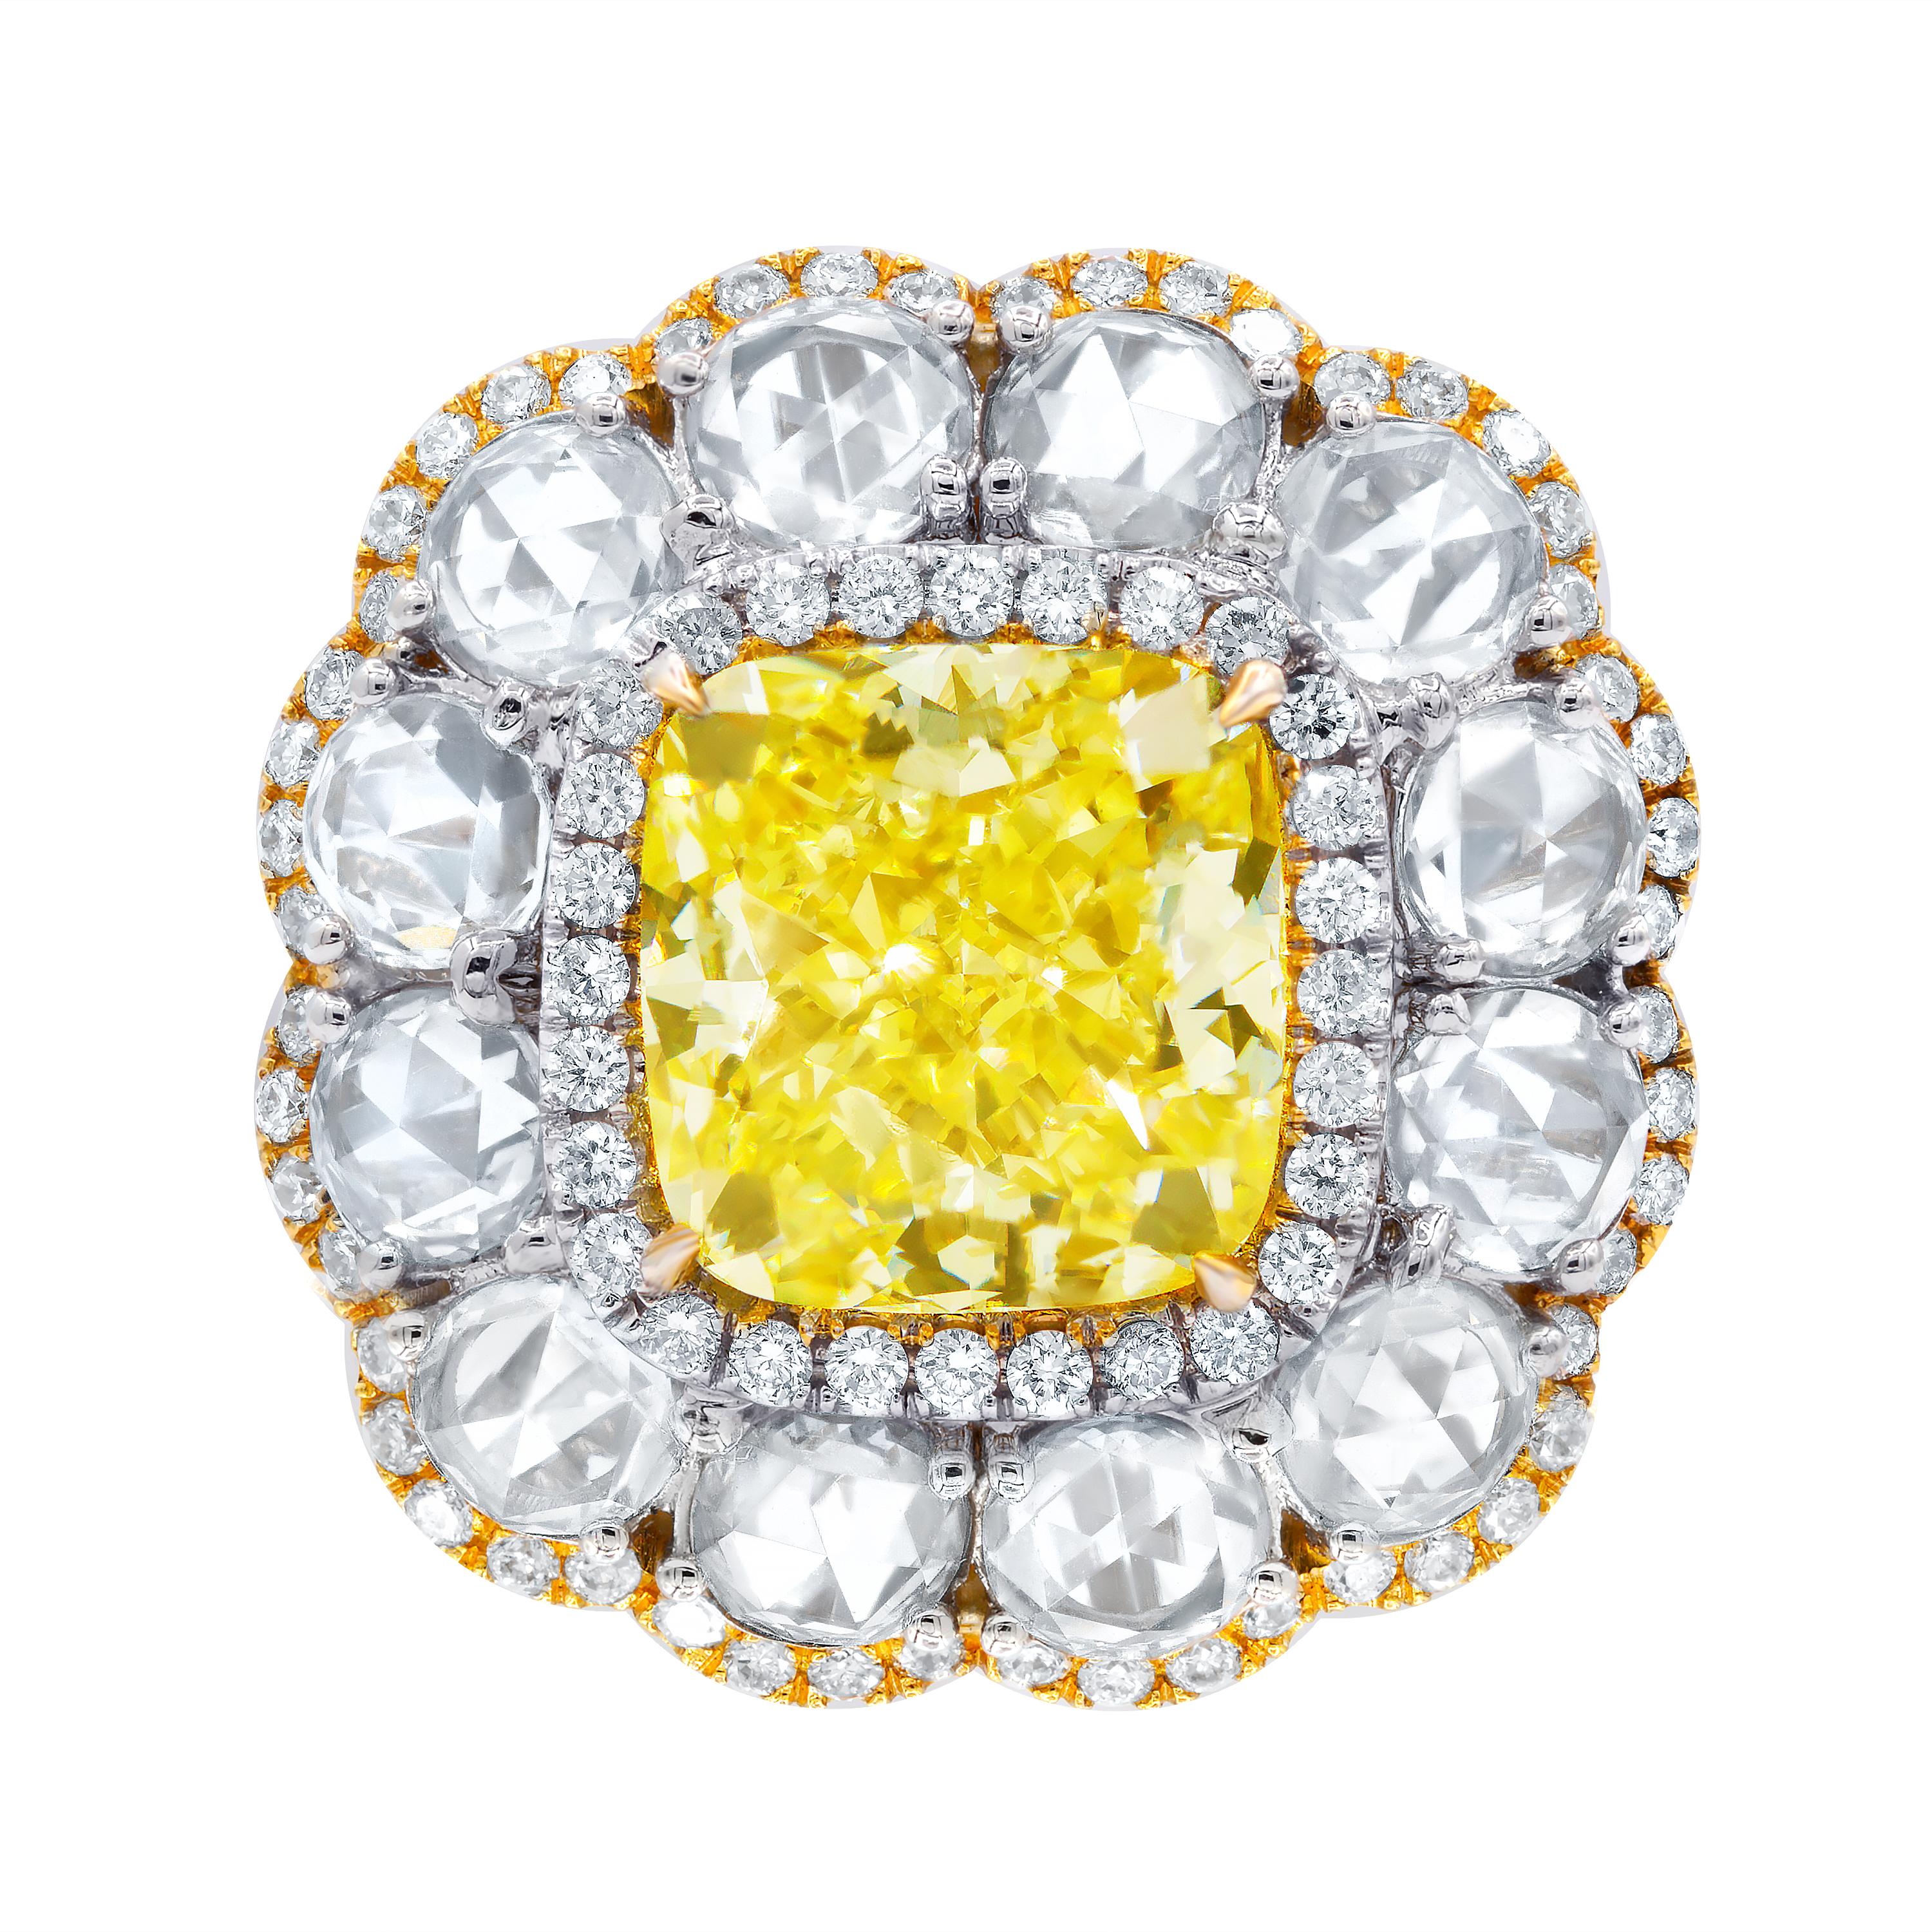 18kt yellow and white gold diamond ring, features GIA certified 6.16 ct fancy yellow color and vs2 clarity cushion  cut diamond (radc890) set with 2.88 carats of rose cut diamonds.
